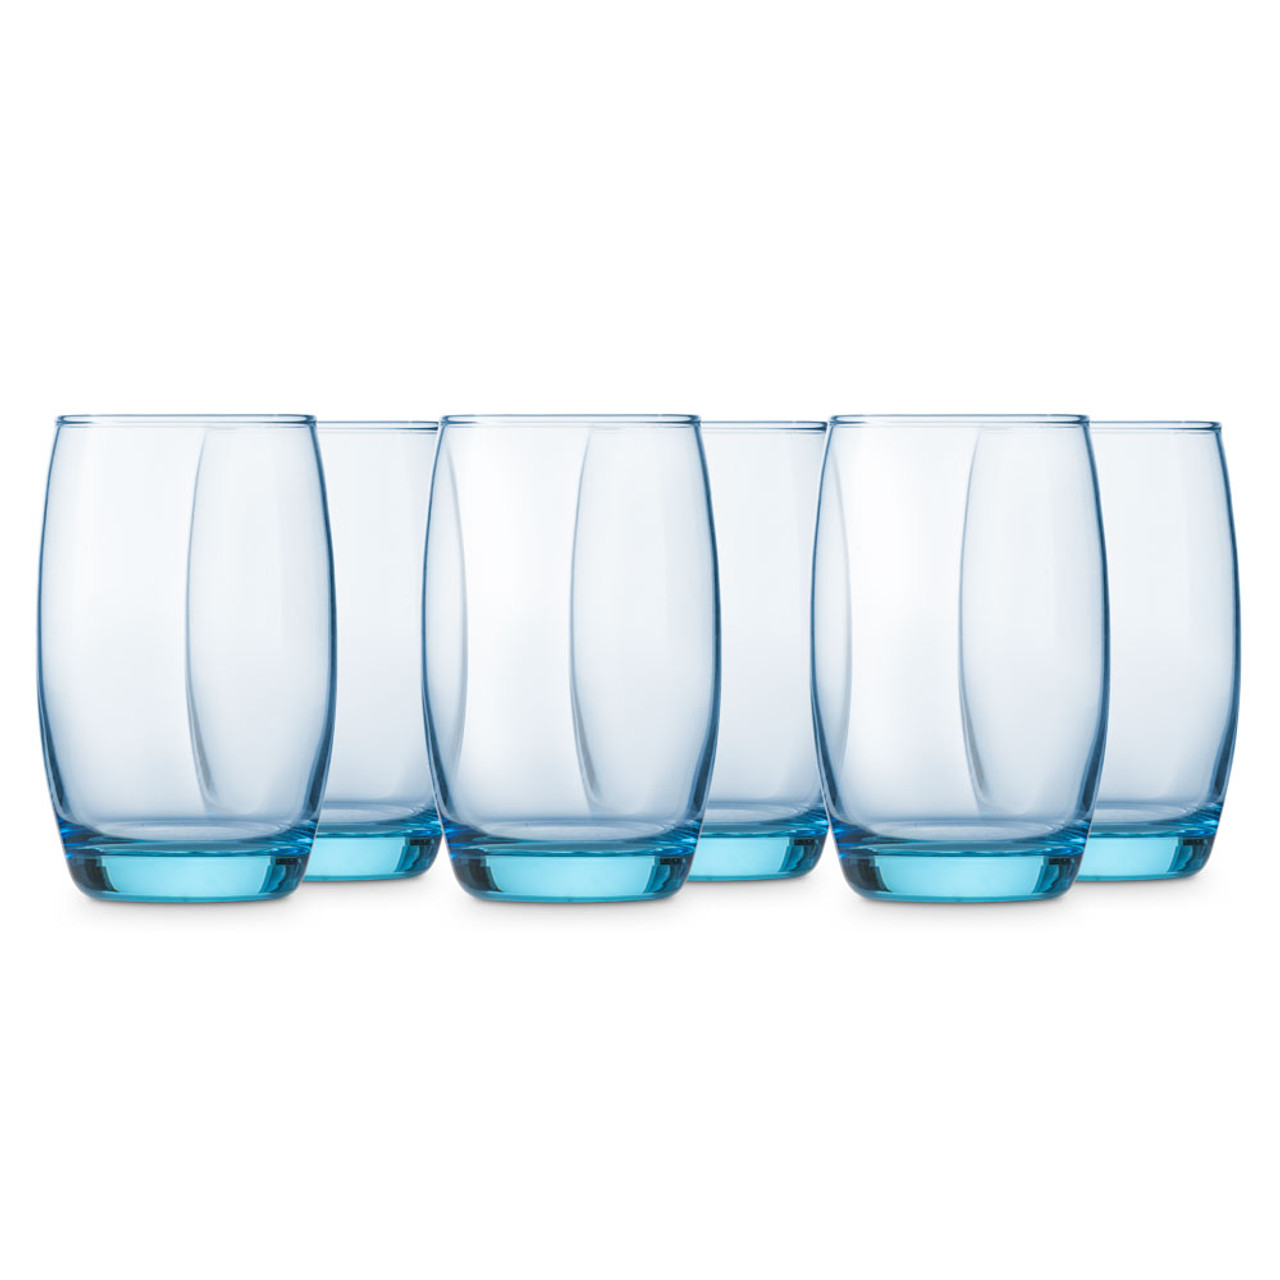 2 Pack 13oz Drinking Glasses Square For Cocktails Mixed Drinks New